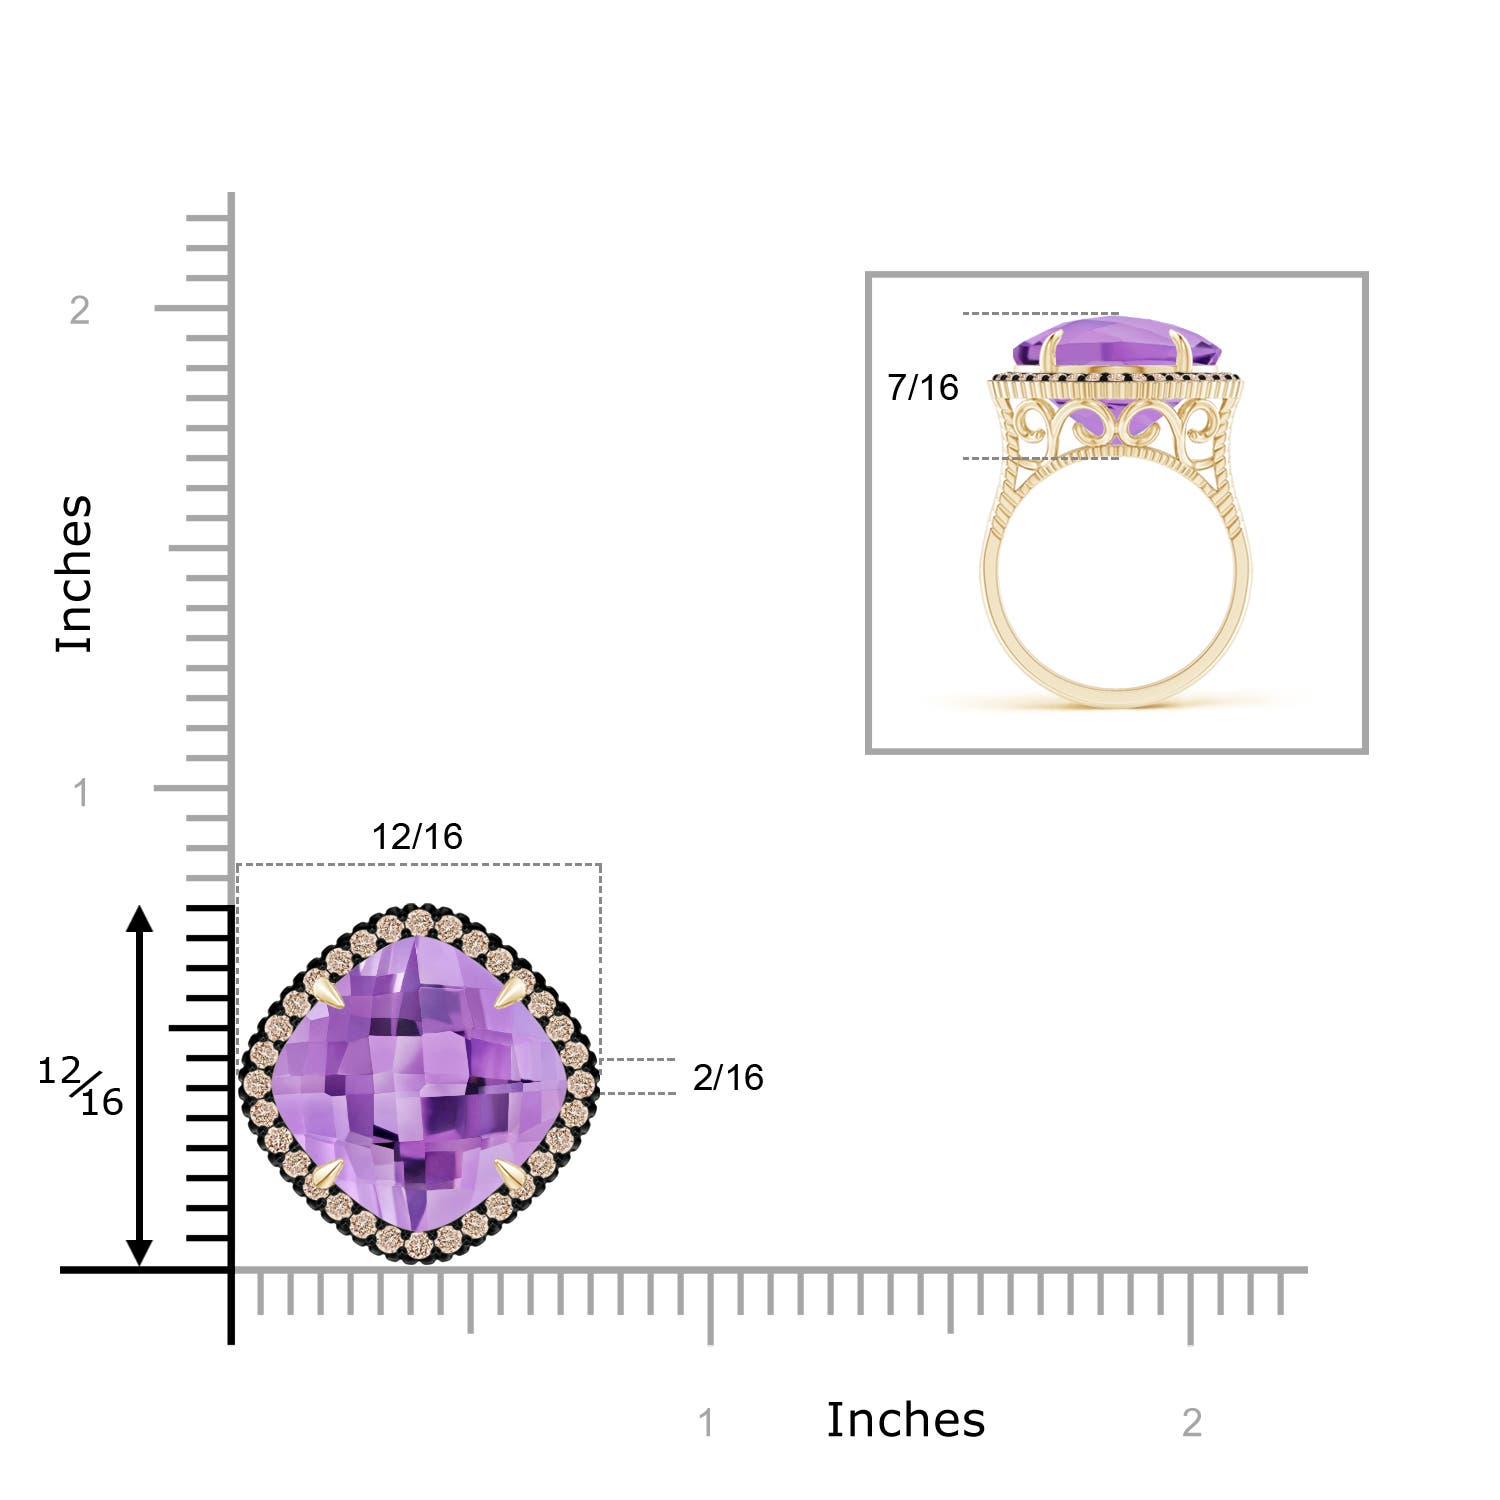 A - Amethyst / 8.38 CT / 14 KT Yellow Gold